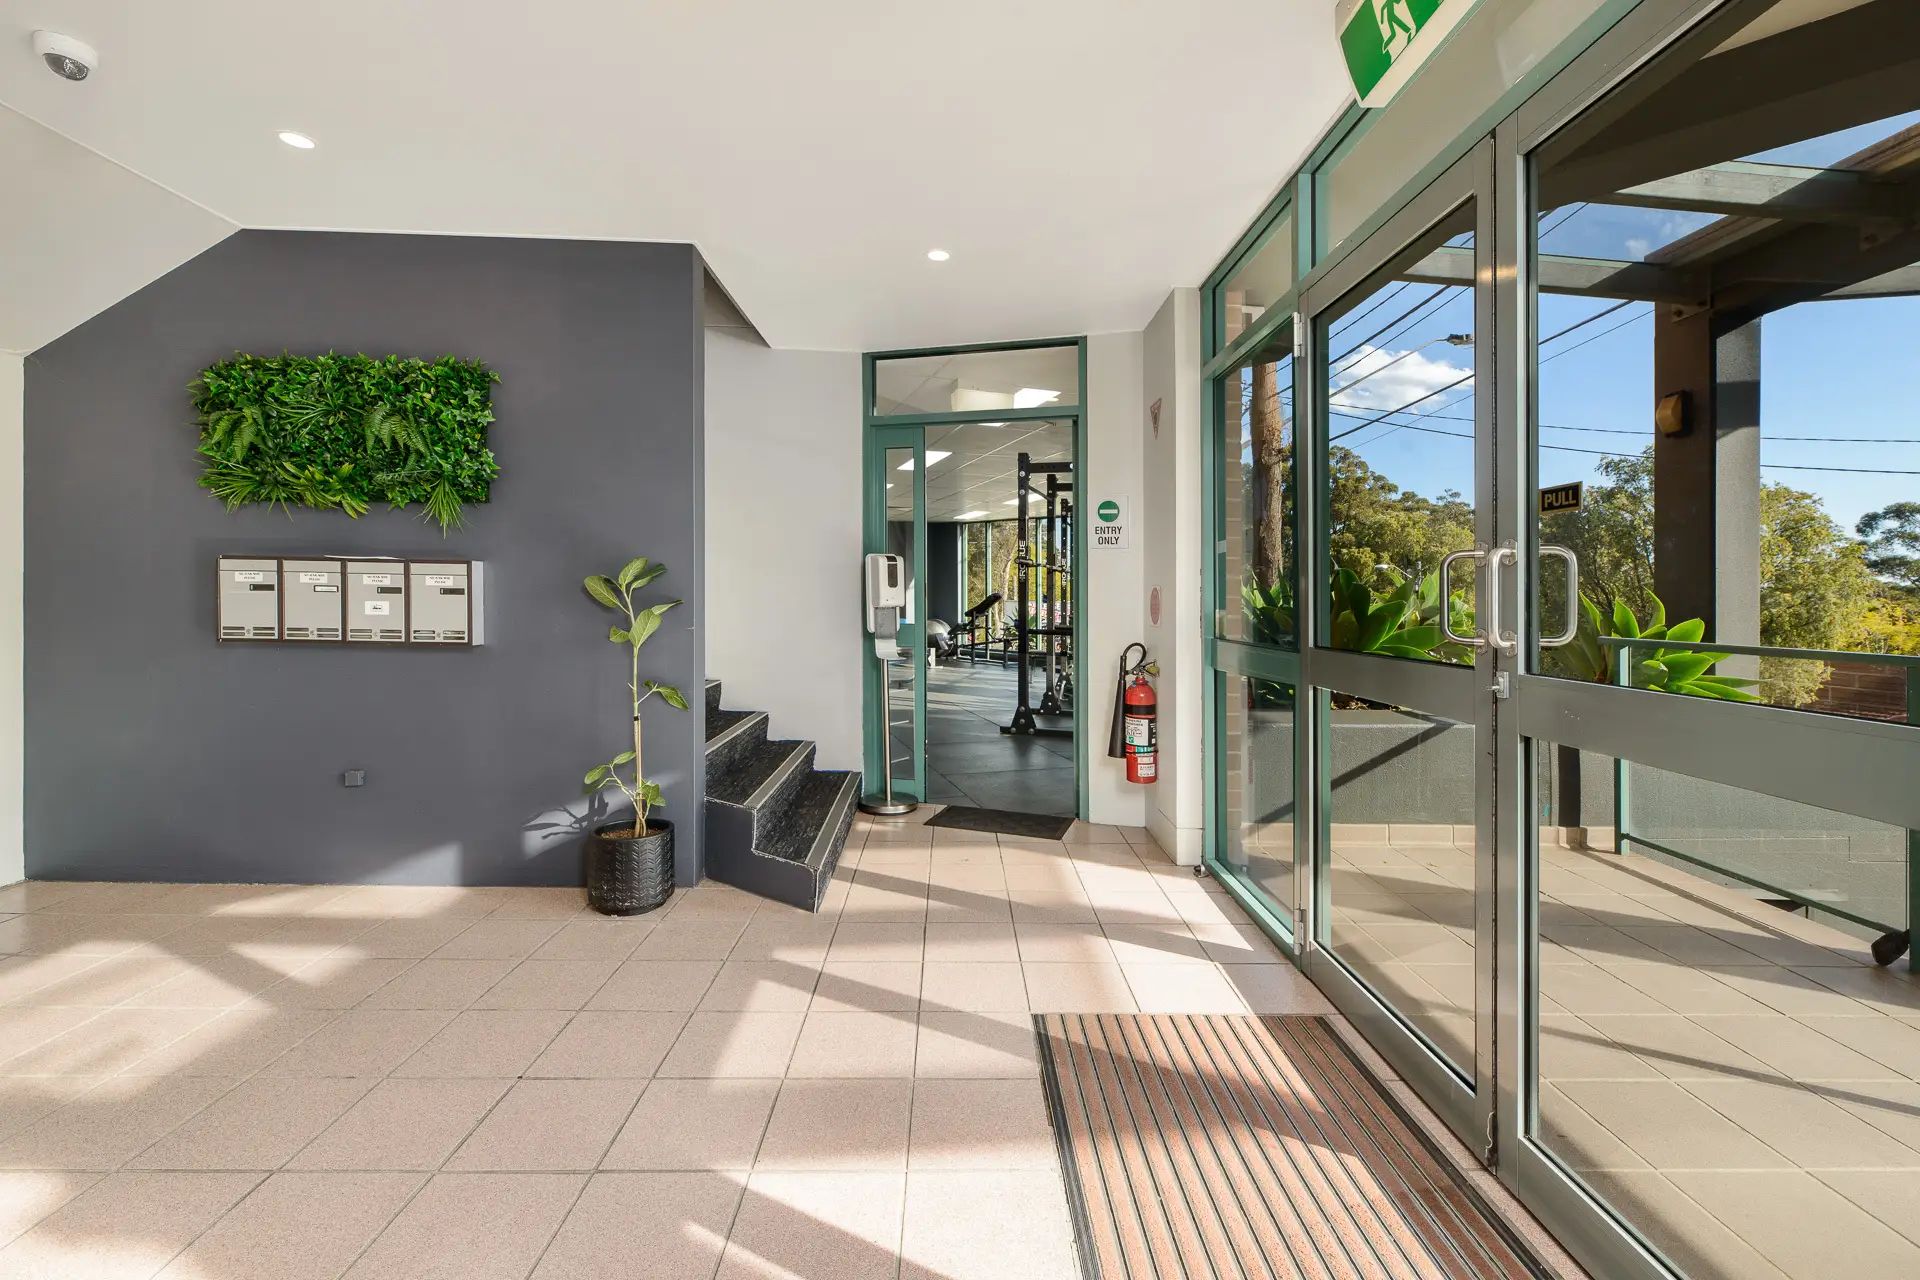 915 Pacific Highway, Pymble Sold by Shead Property - image 1